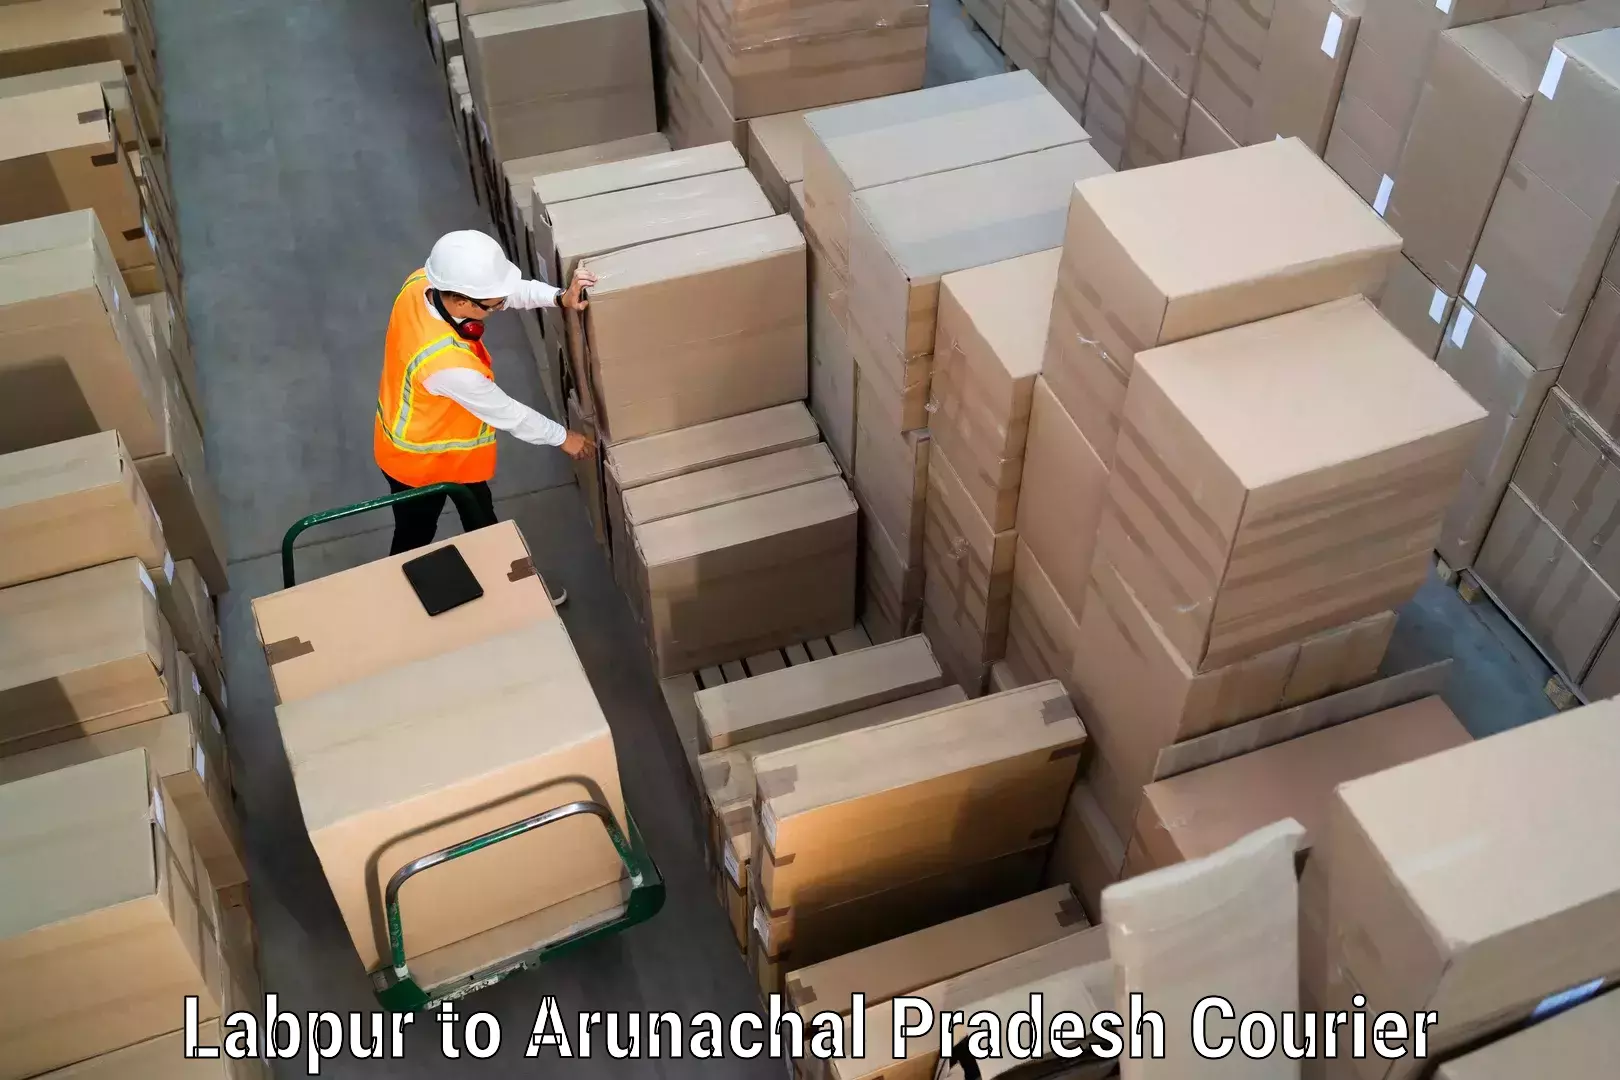 Personal parcel delivery Labpur to Lower Subansiri